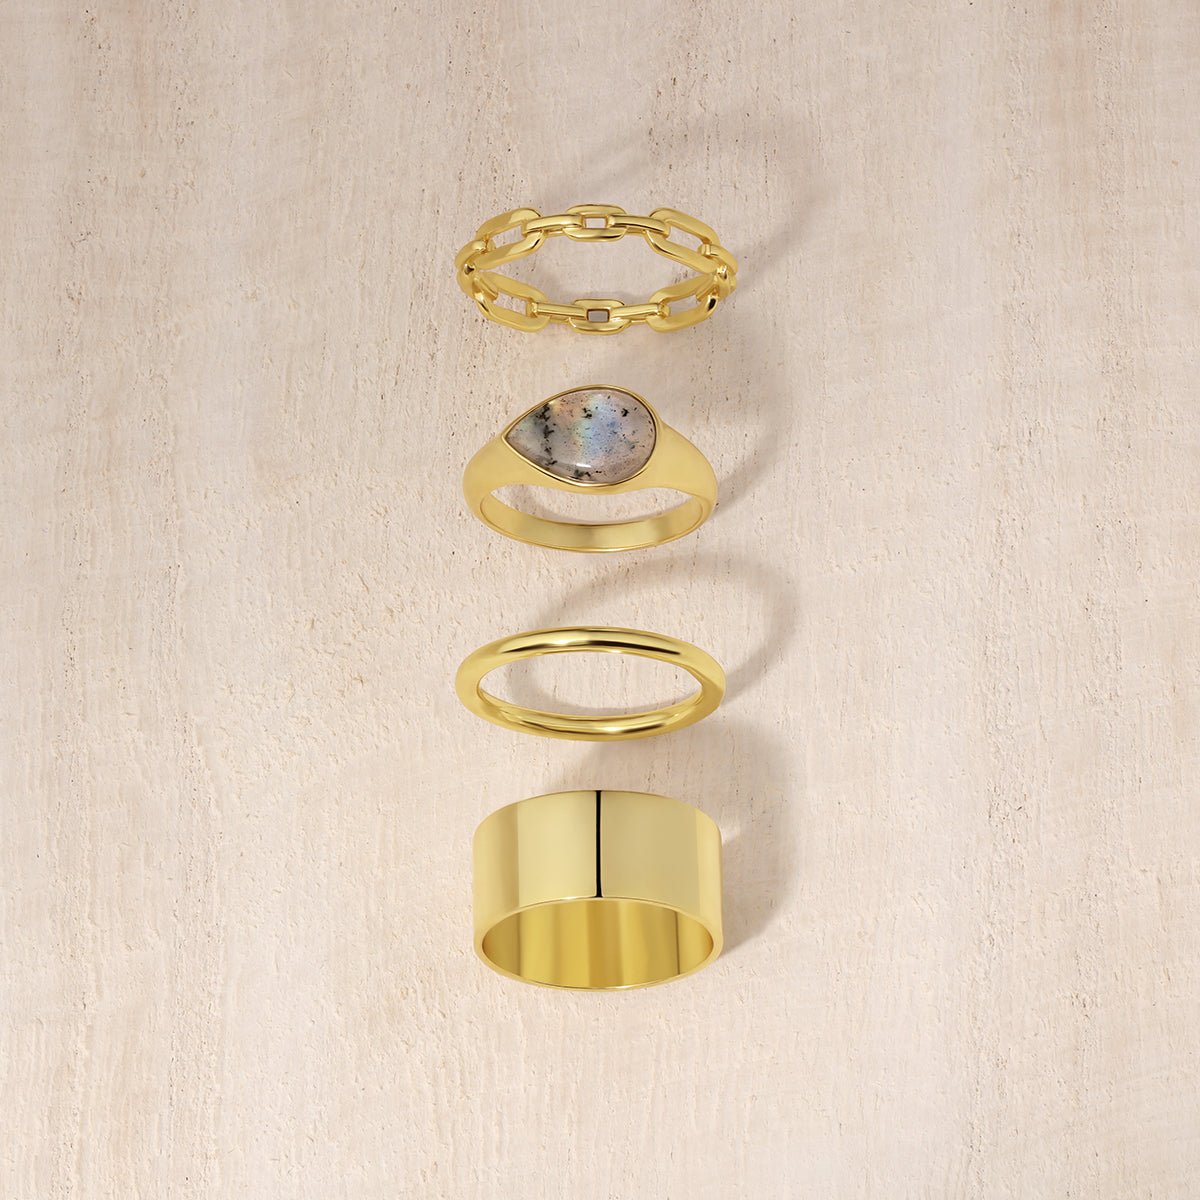 best selling gold plated rings. shop rings